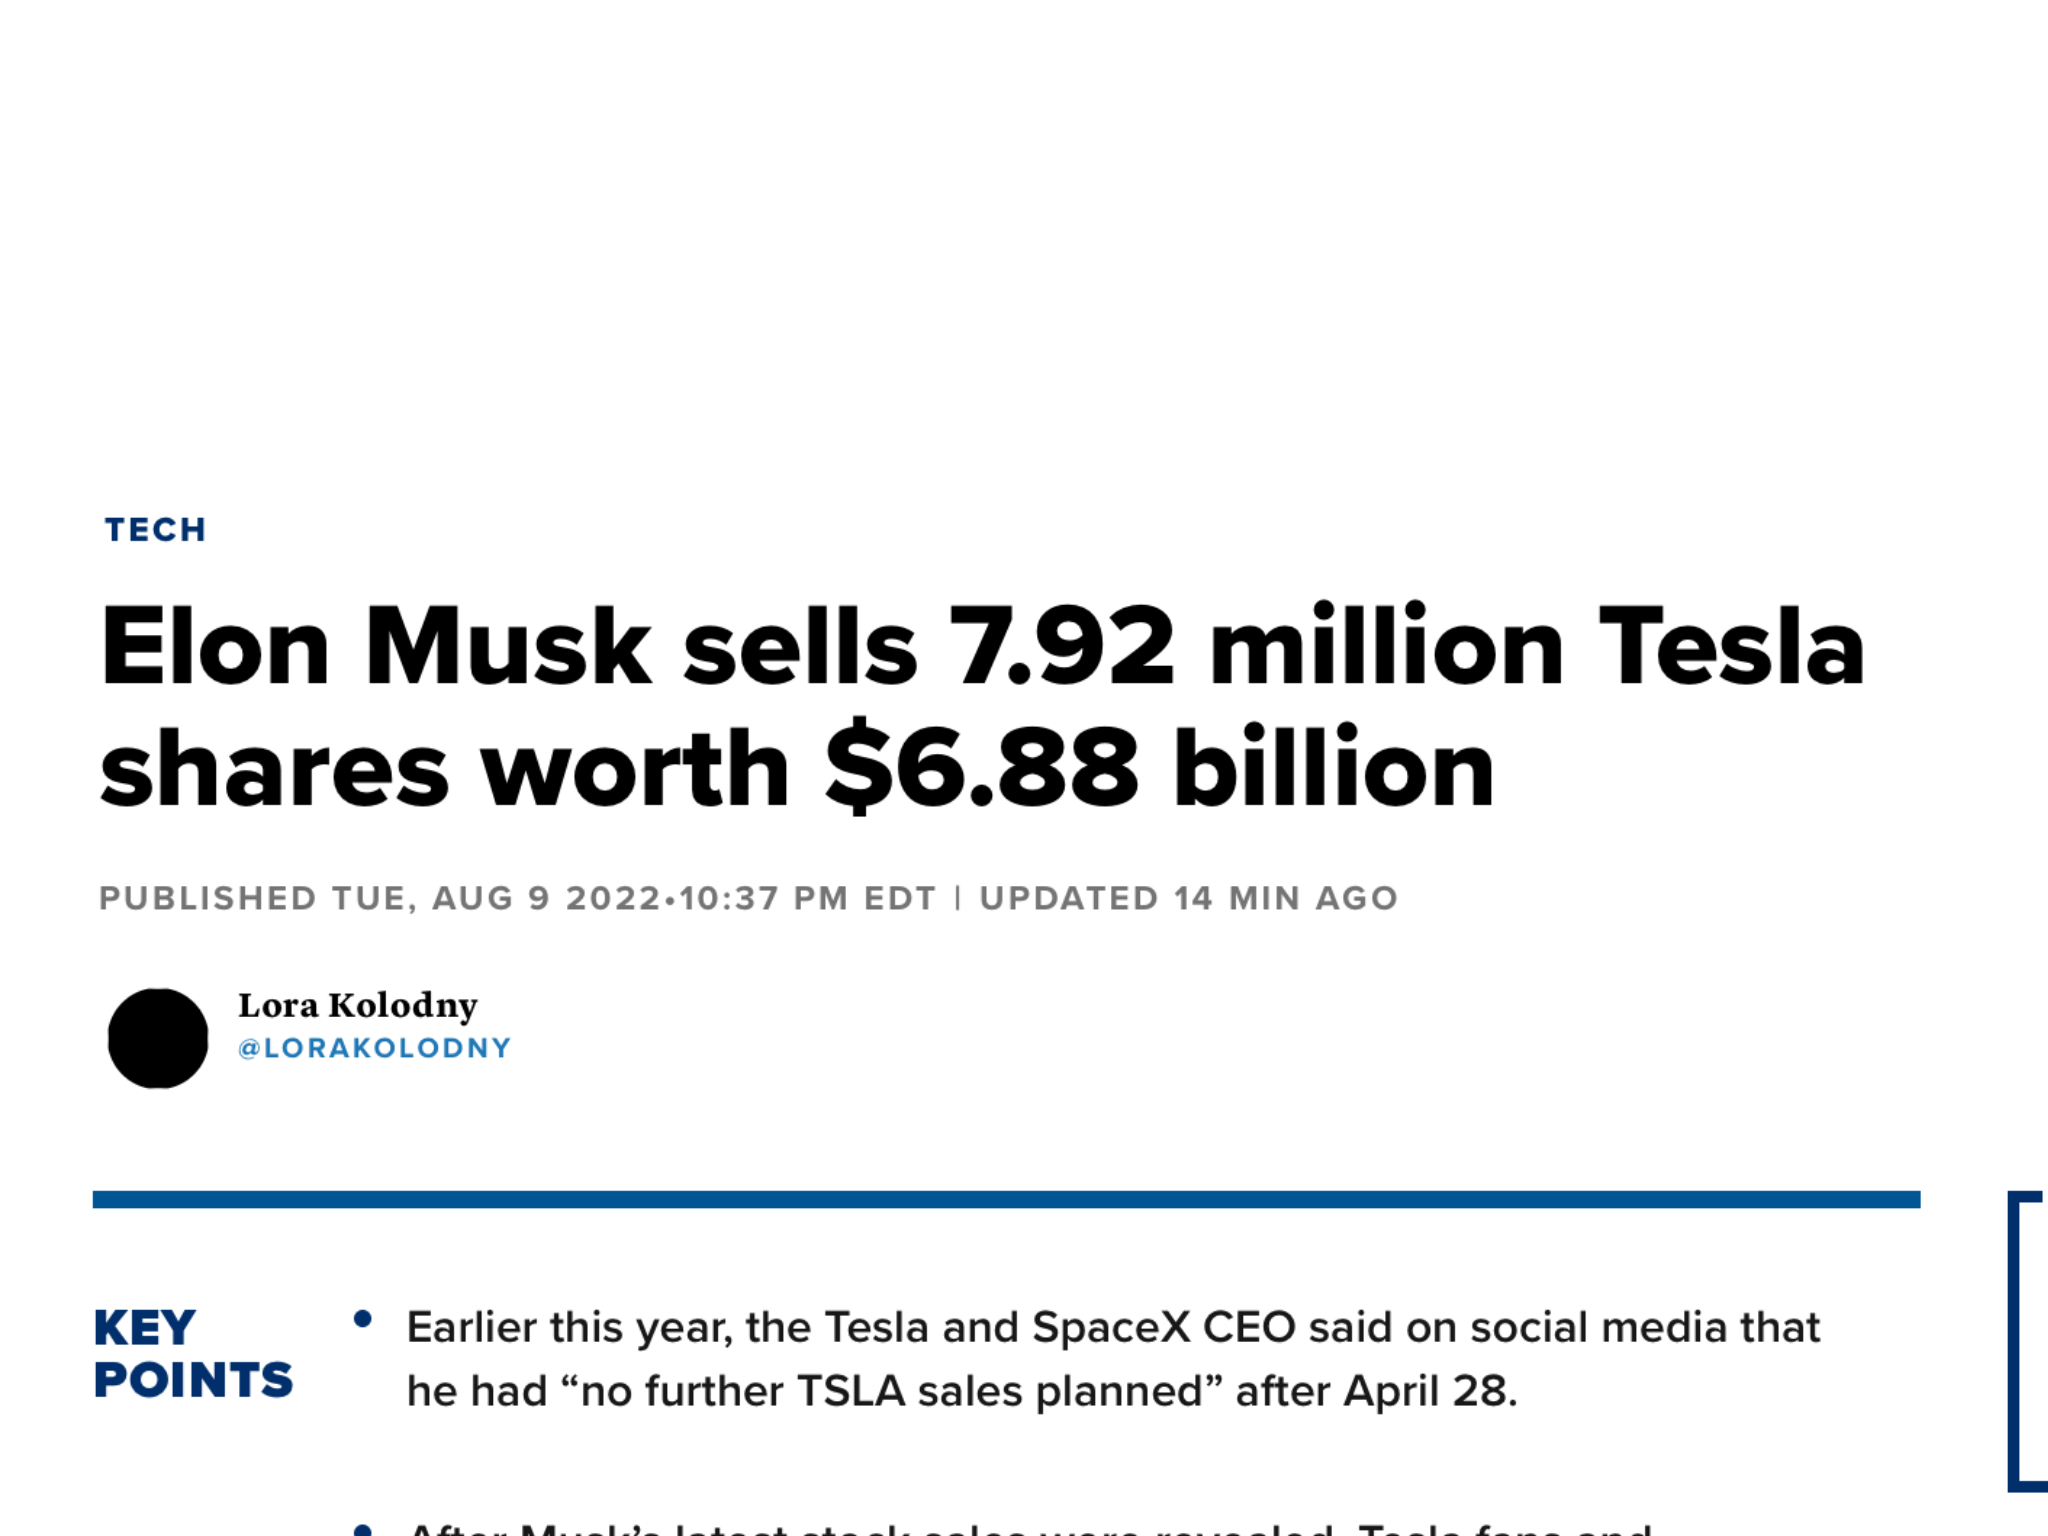 THAT IS A BOATLOAD OF STOCK ELON SOLD